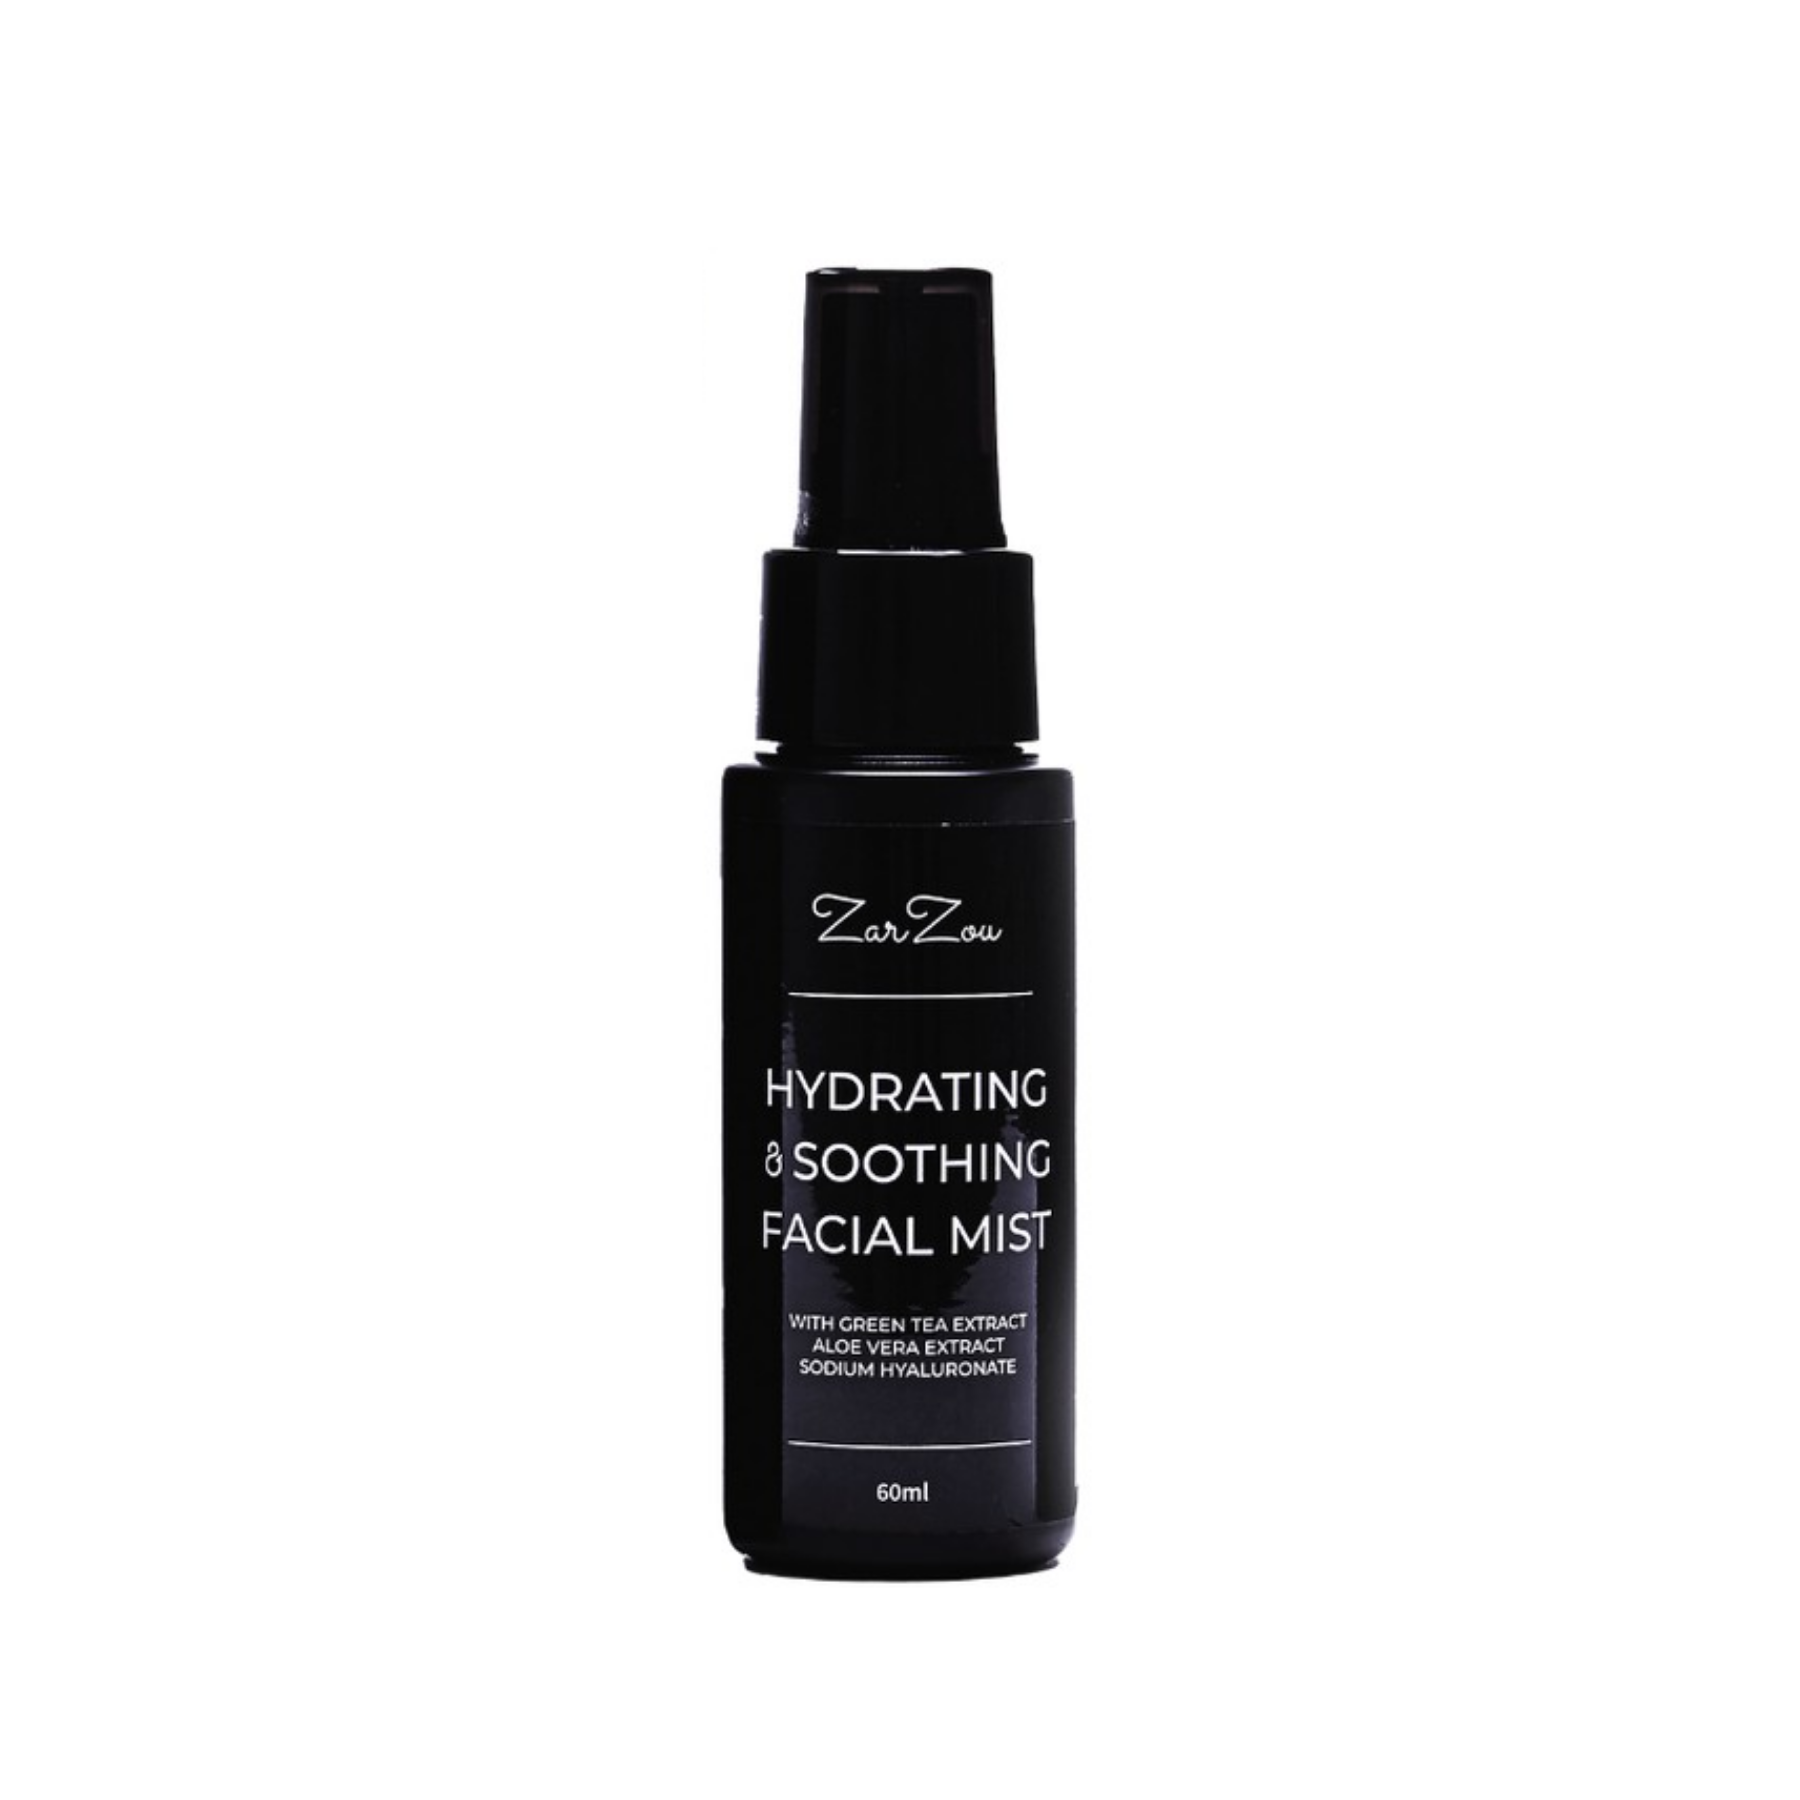 Zarzou Beauty Hydrating & Soothing Facial Mist (HSM) 60ml